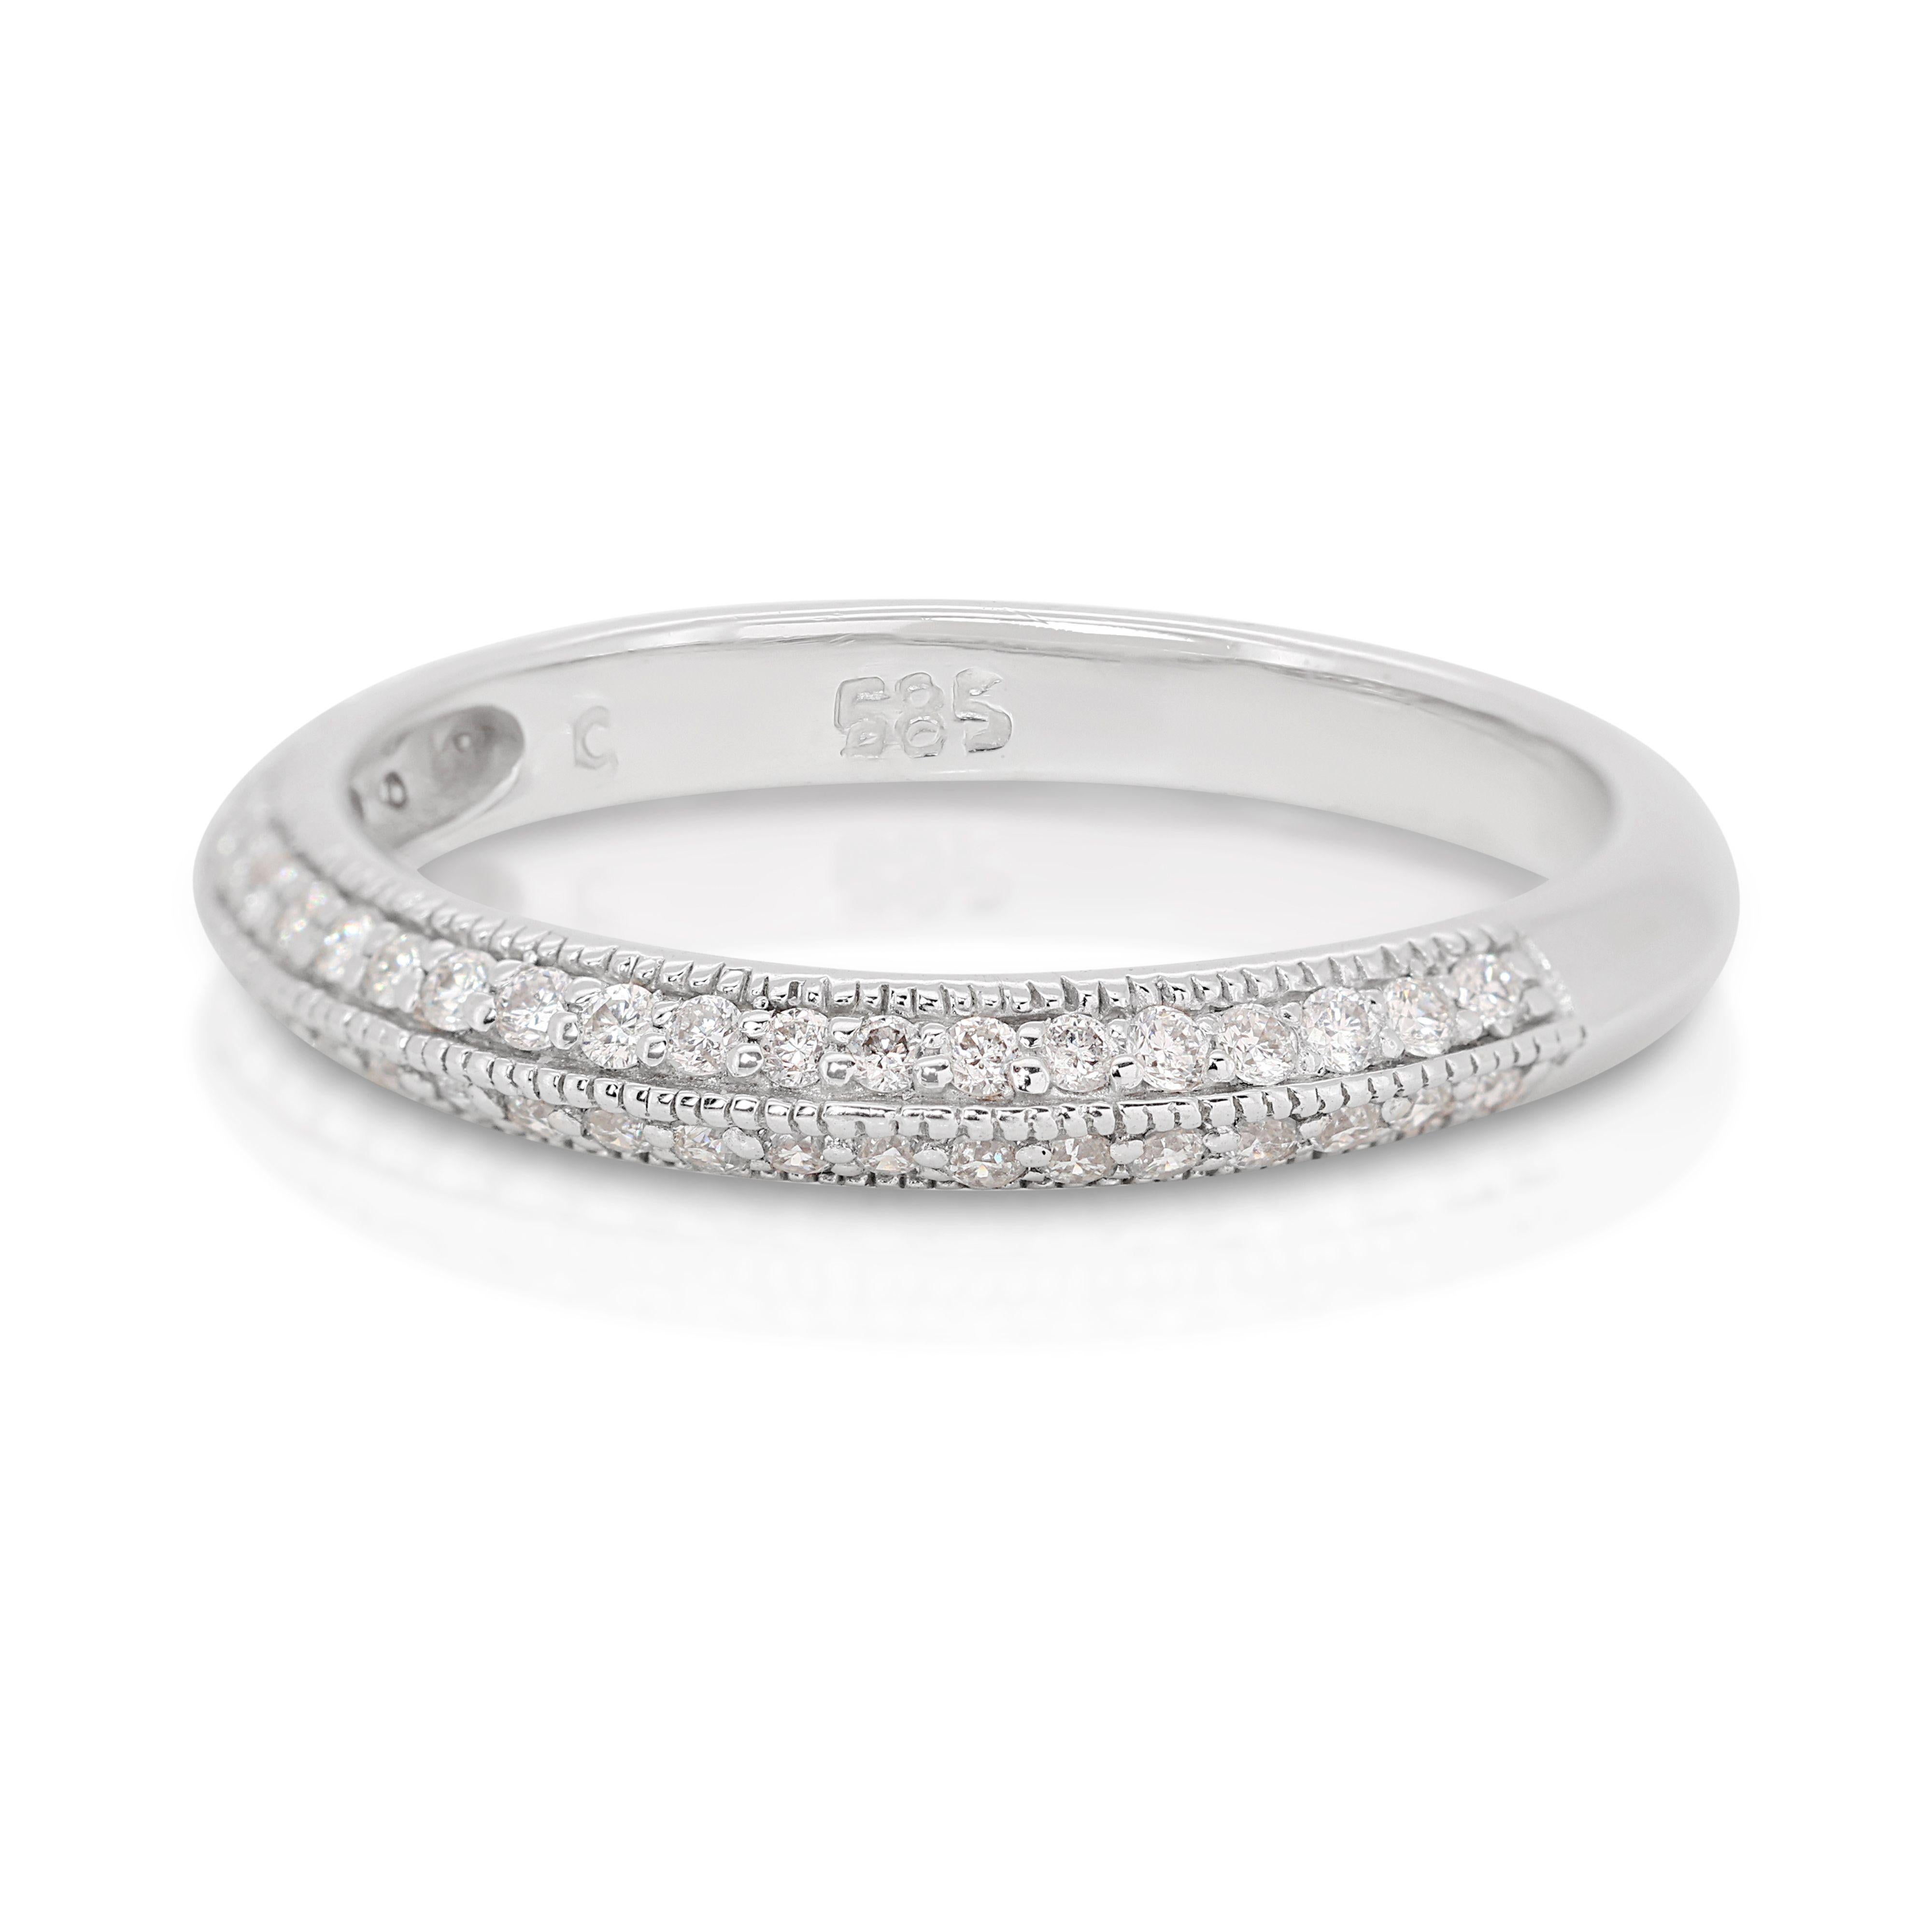 Women's Gorgeous 14k White gold Pave Band Ring with 0.48 carat Natural Diamonds For Sale